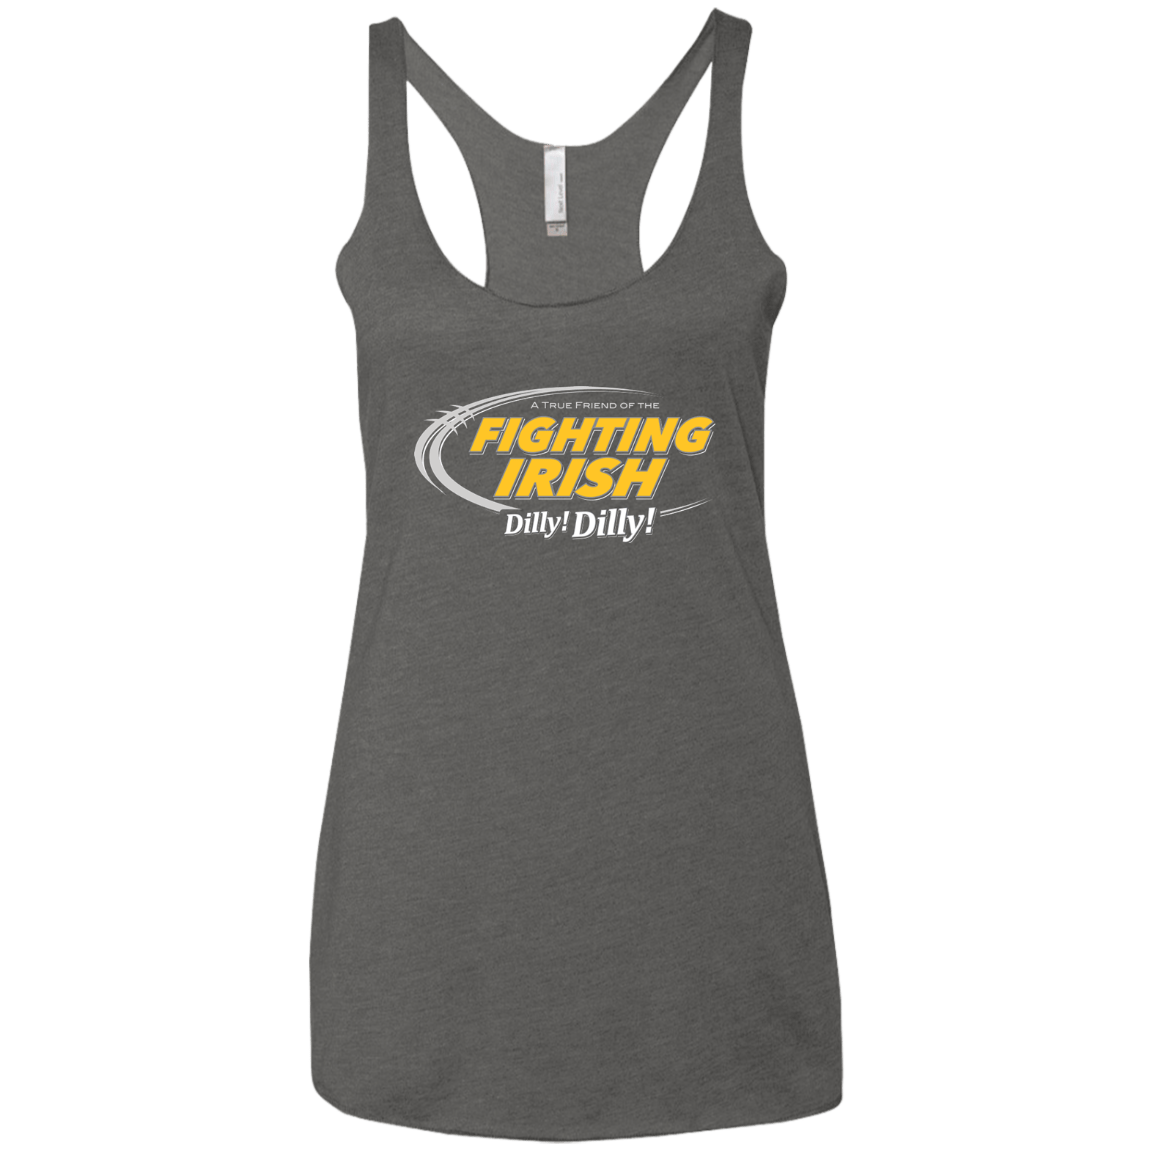 T-Shirts Premium Heather / X-Small Notre Dame Dilly Dilly Women's Triblend Racerback Tank